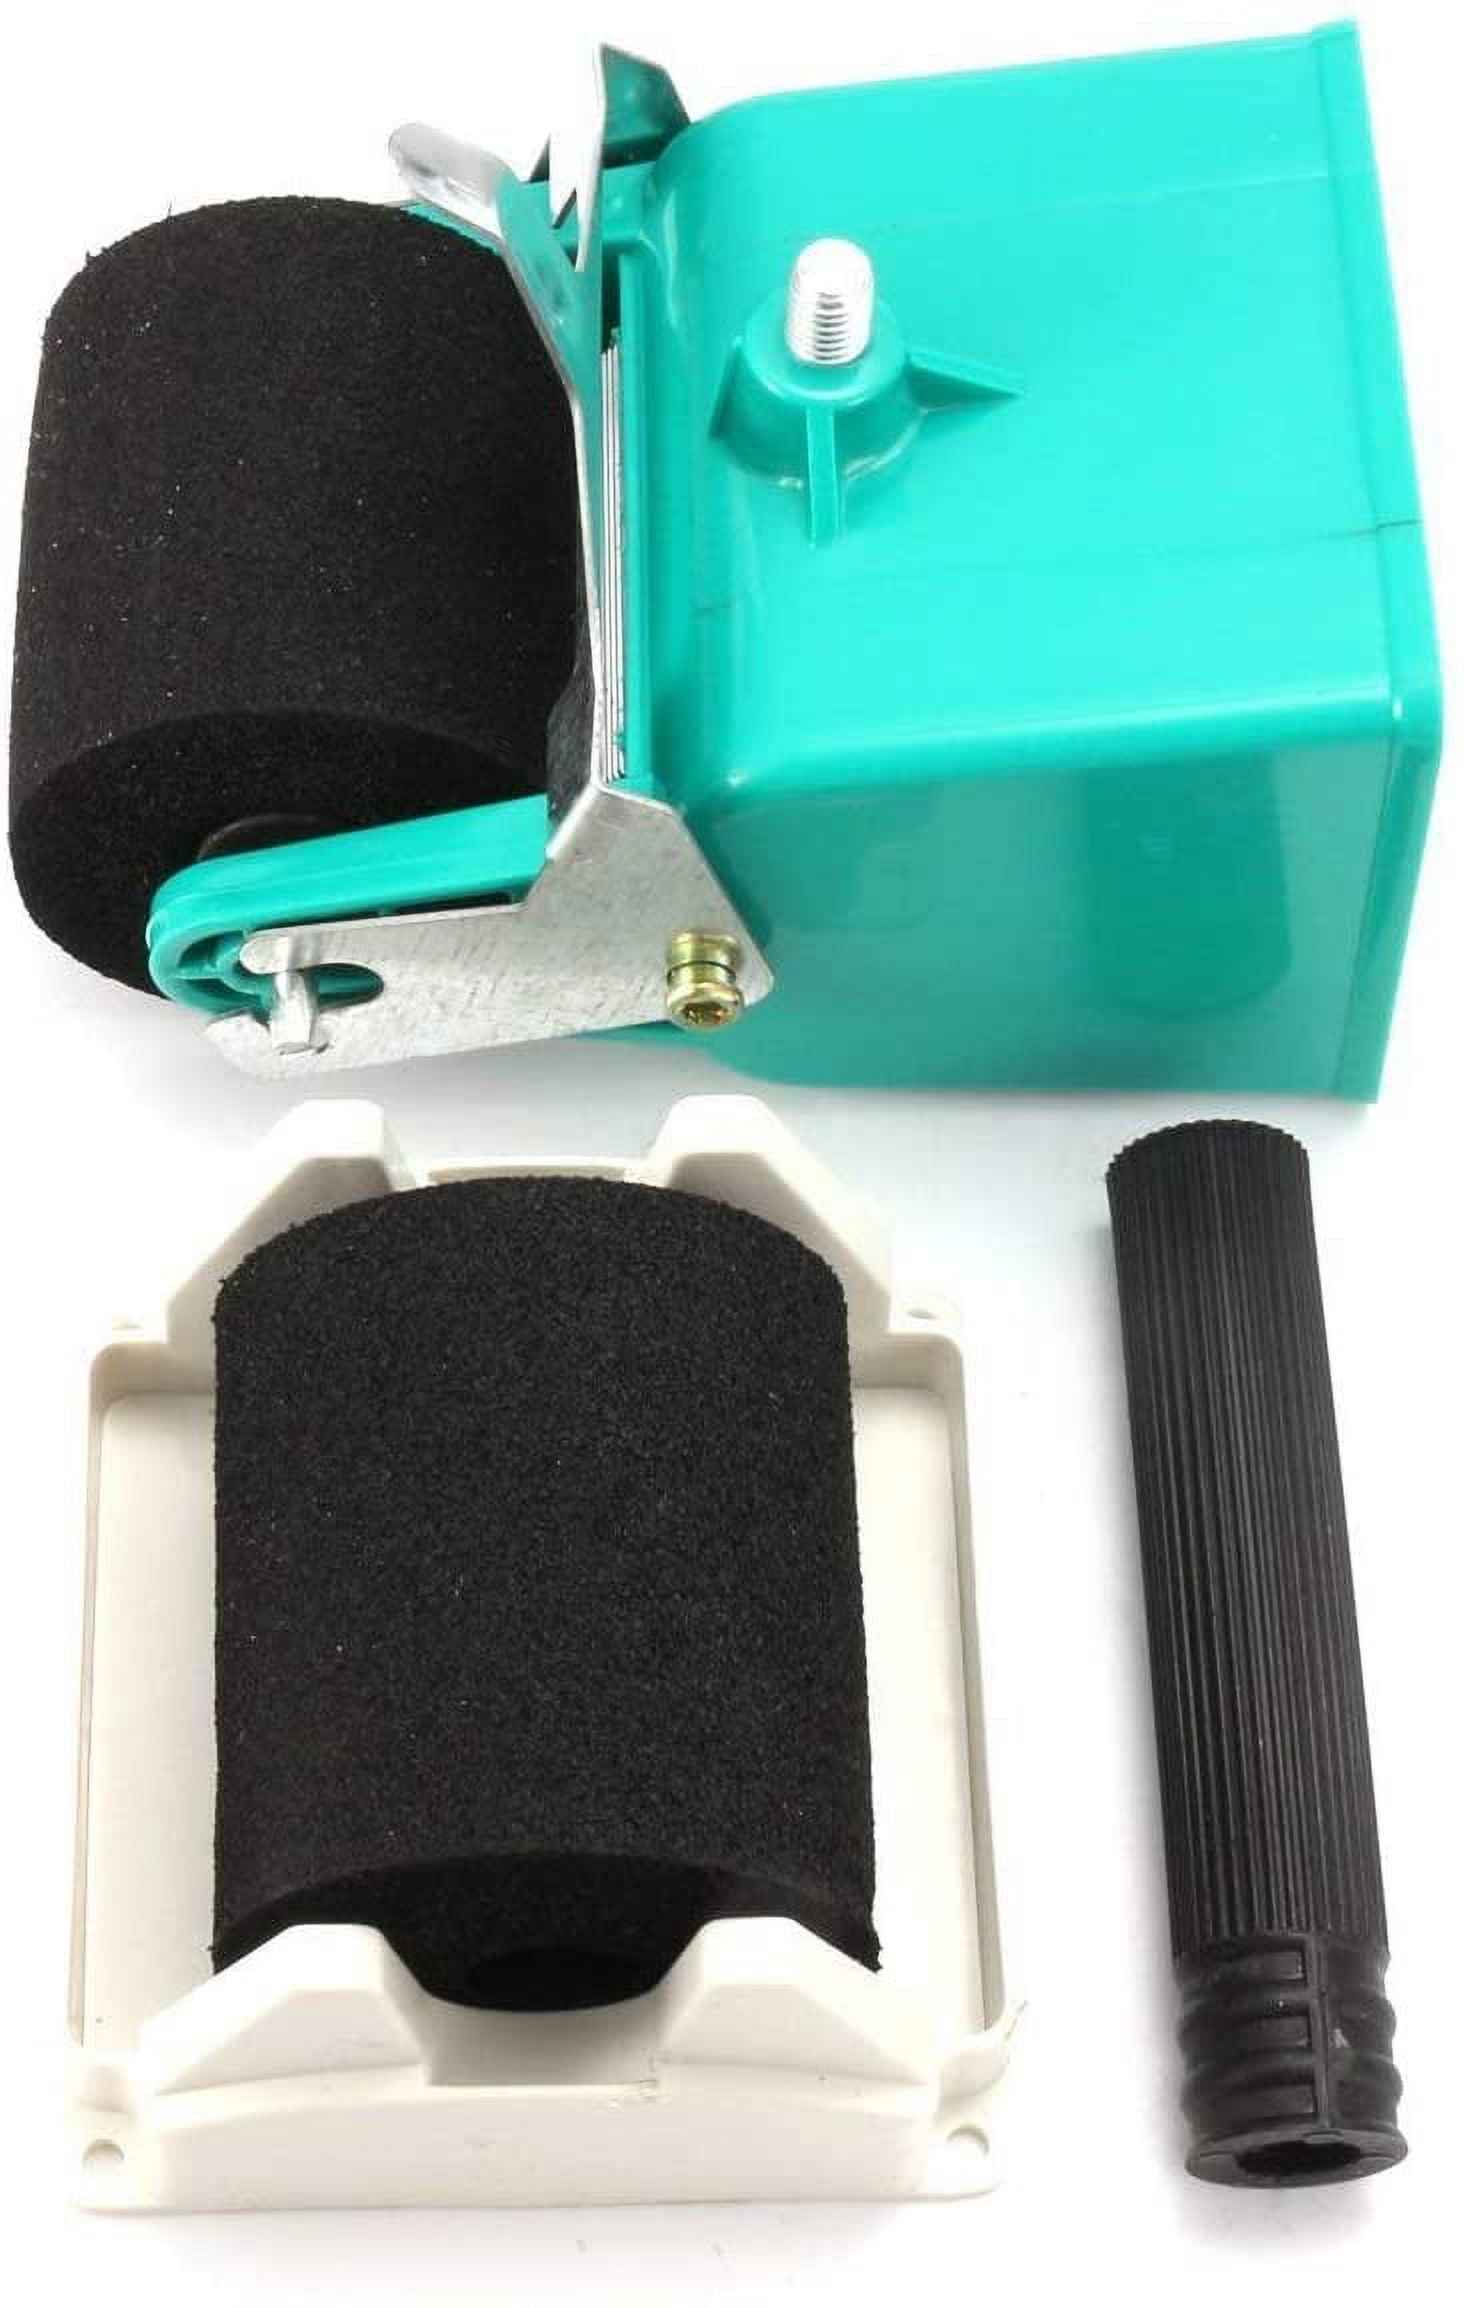 IGM Hand-held Glue Spreader 180 mm, Rubber Roller, with a Stand